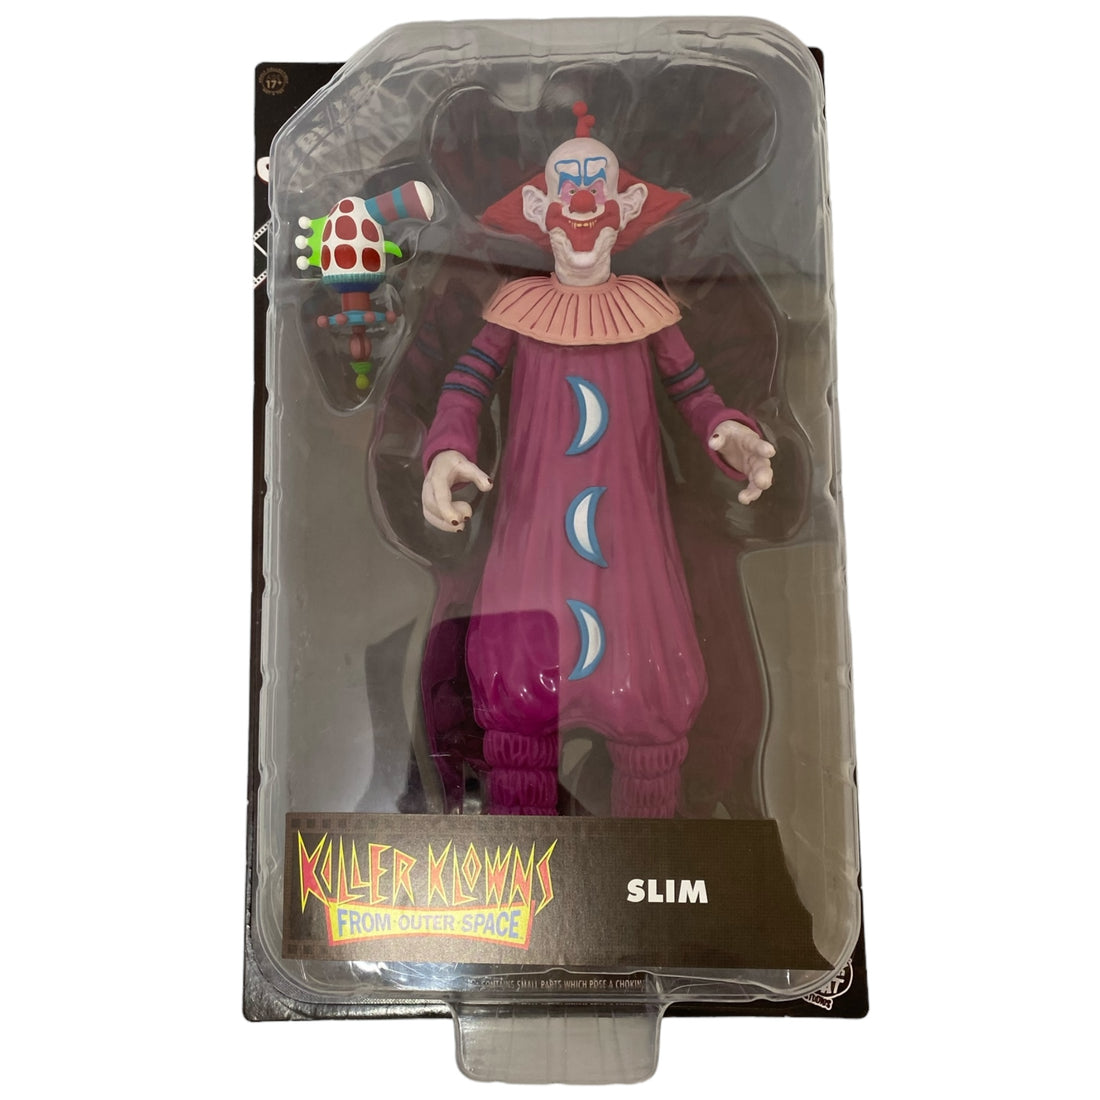 Killer Klowns From Space Slim 8" Scale Figure